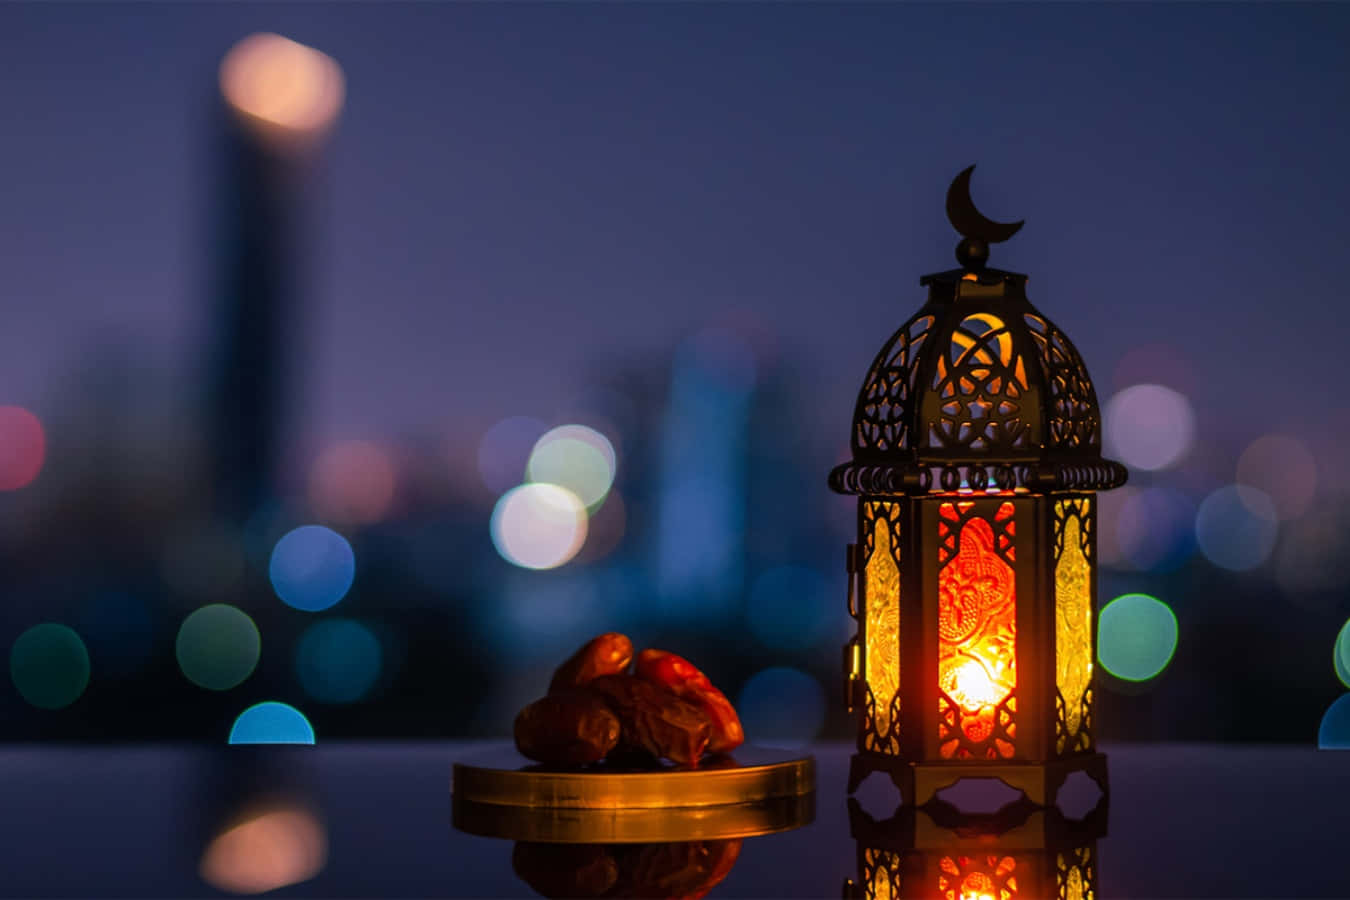 A Lantern With A Candle And A City View